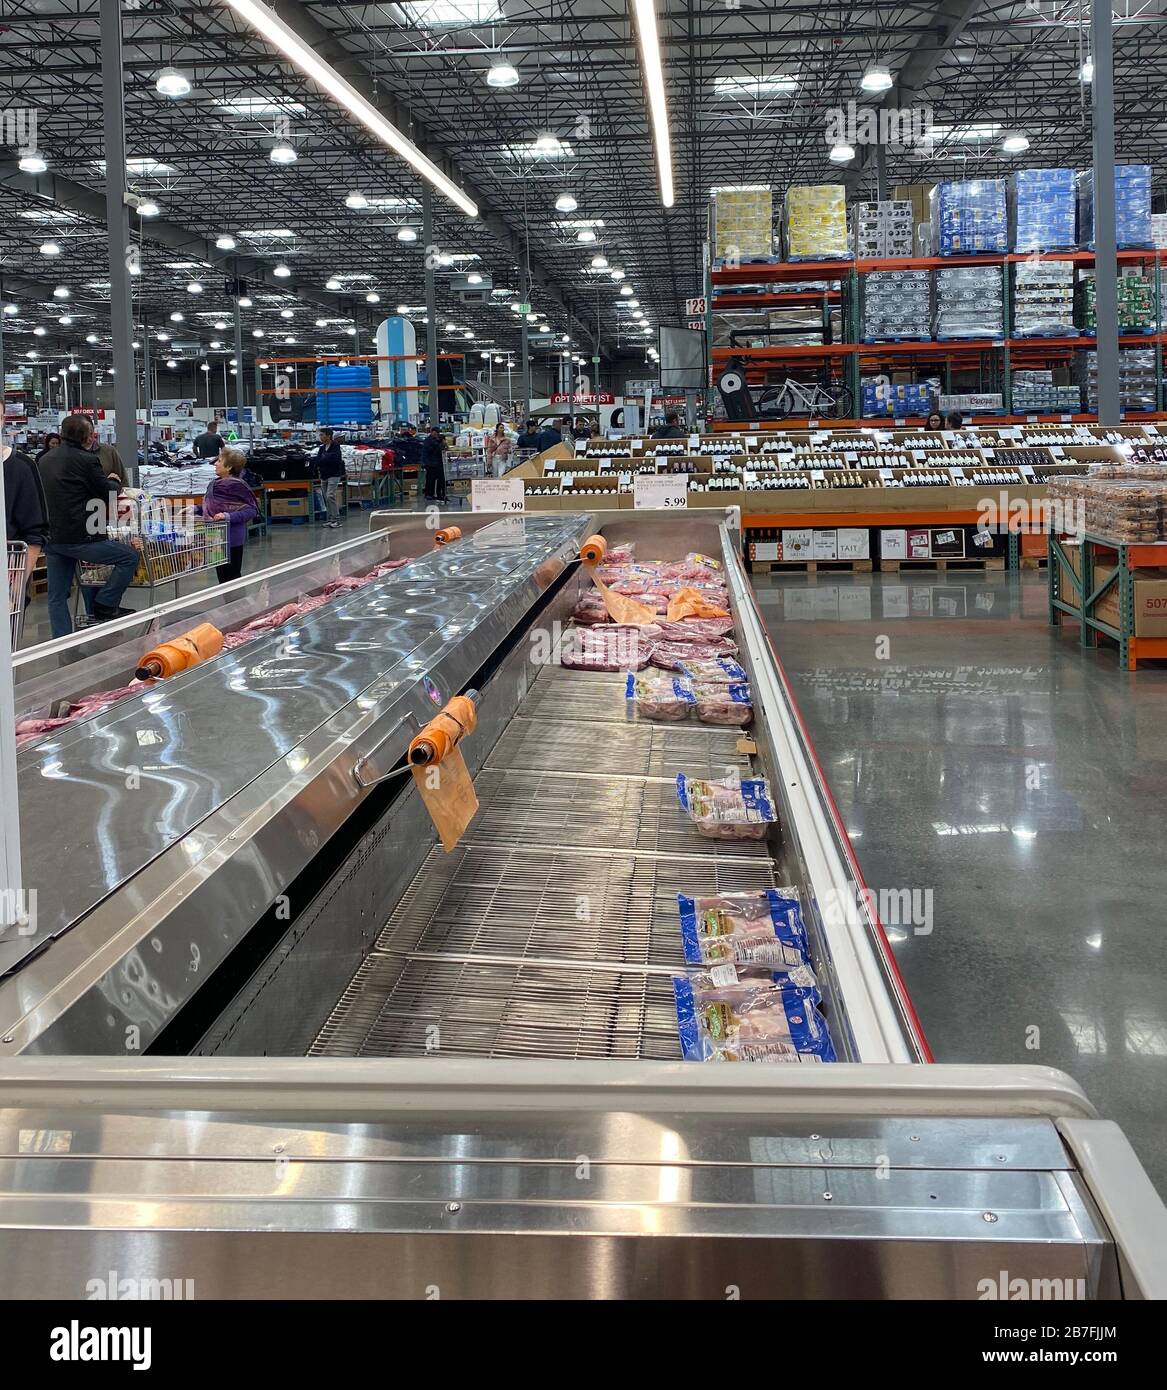 Santa Barbara, California, USA. 15th Mar, 2020. Empty Meat Shelves at Costco, Goleta (Santa Barbara, CA). A run on meat, water and toilet paper as fears of the Covid-19 virus and a possible national mandatory quarantine send residents flocking to Costco to stock up. Credit: ZUMA Press, Inc./Alamy Live News Stock Photo